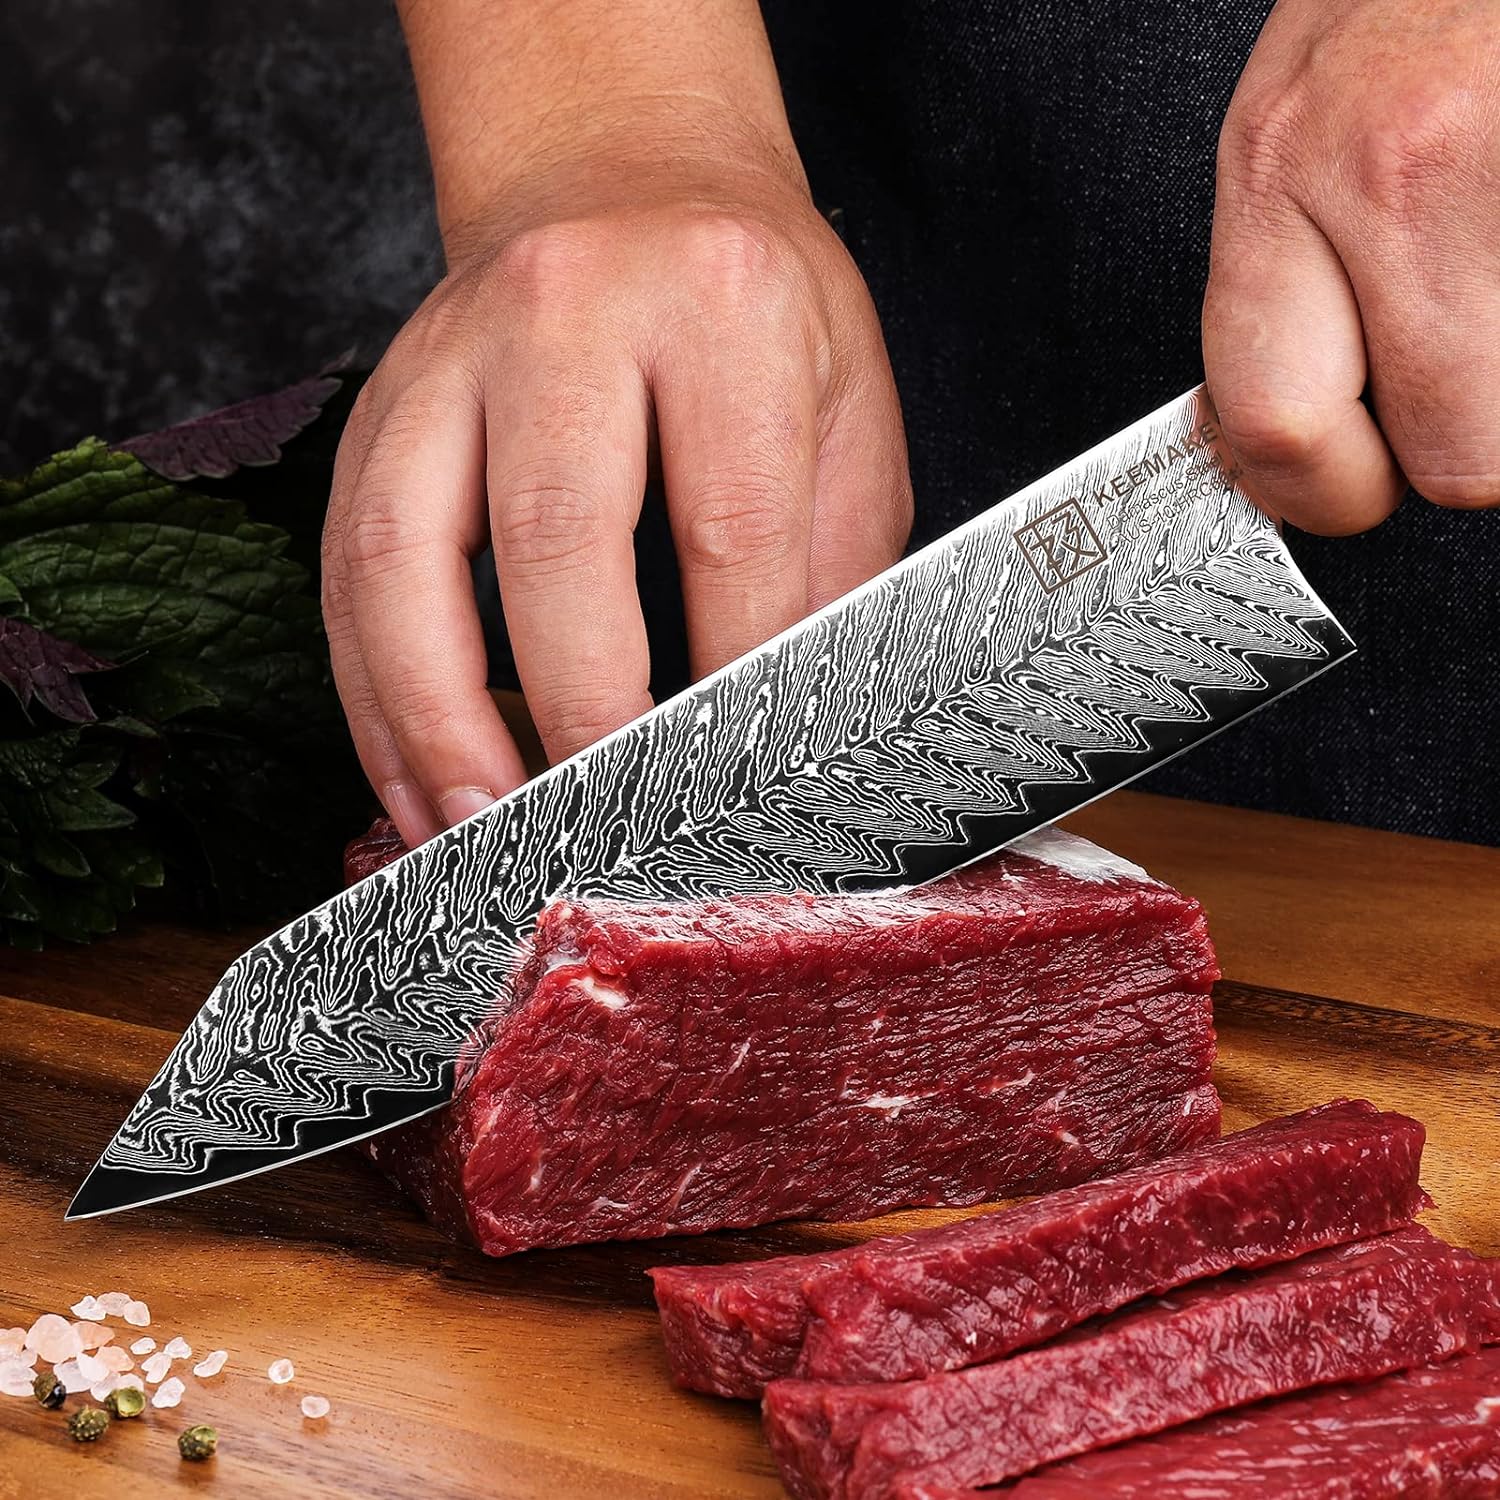 Keemake kitchen knife 8inch Gyuto chef's knife 67 layers Damascus stainless steel  for kitchen meat cutting(Blue G10 Handle)